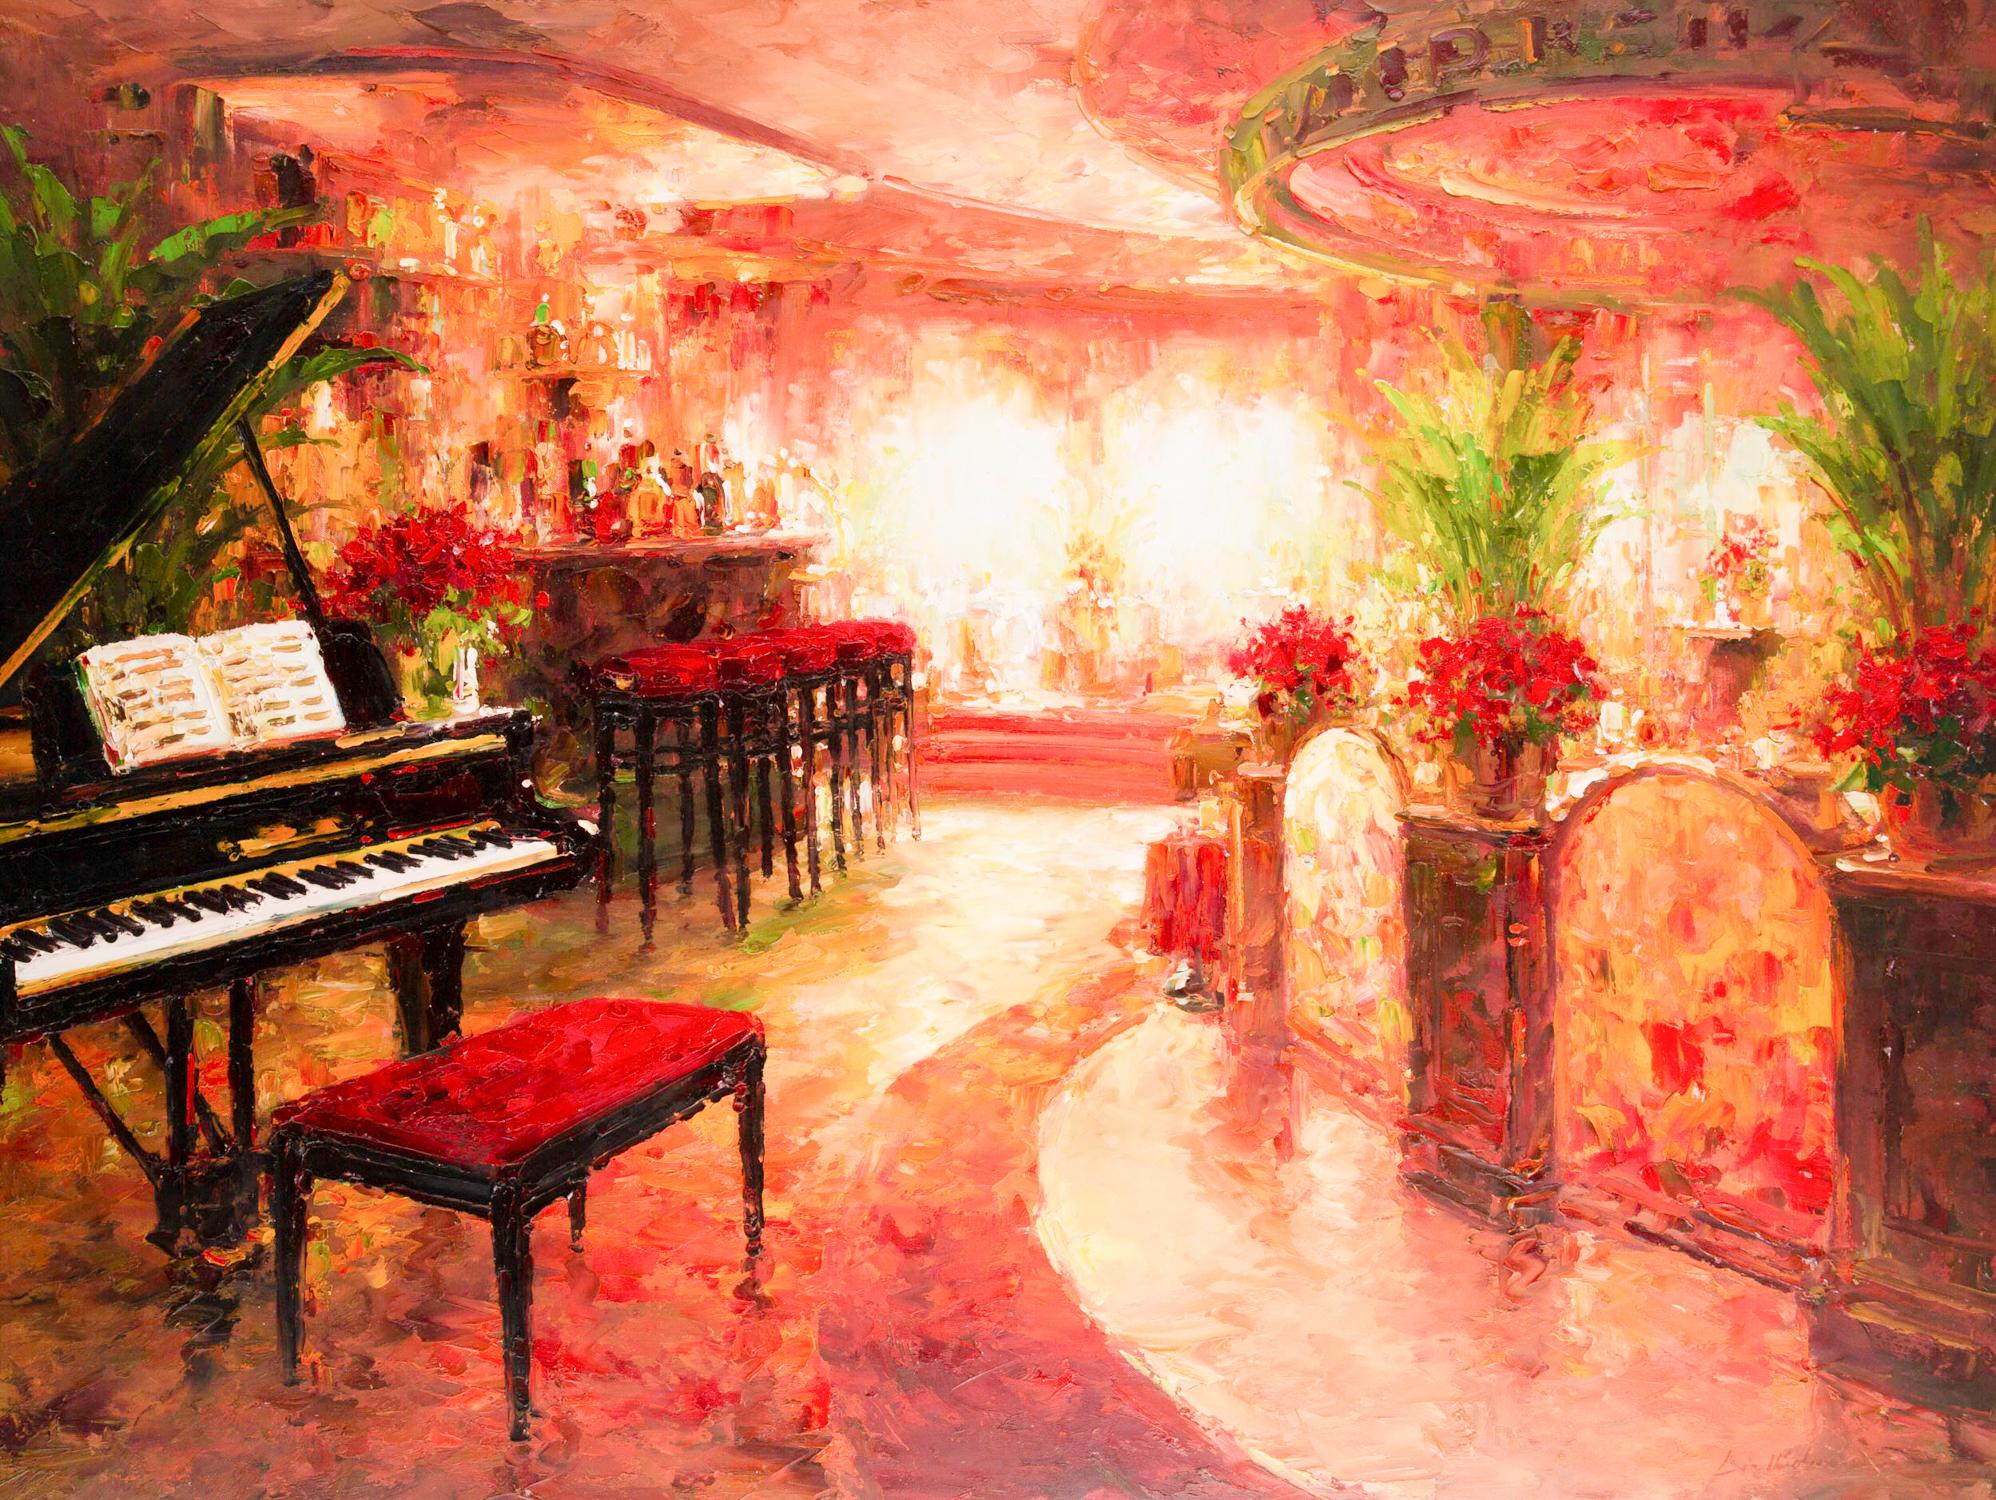  Title: Bar 2
 Medium: Oil on canvas
 Size: 47.25 x 35.75 inches
 Frame: Framing options available!
 Condition: The painting is laid on the matt board and appears to be in excellent condition.
 
 Year: 2000 Circa
 Artist: Lin Hongdan
 Signature: